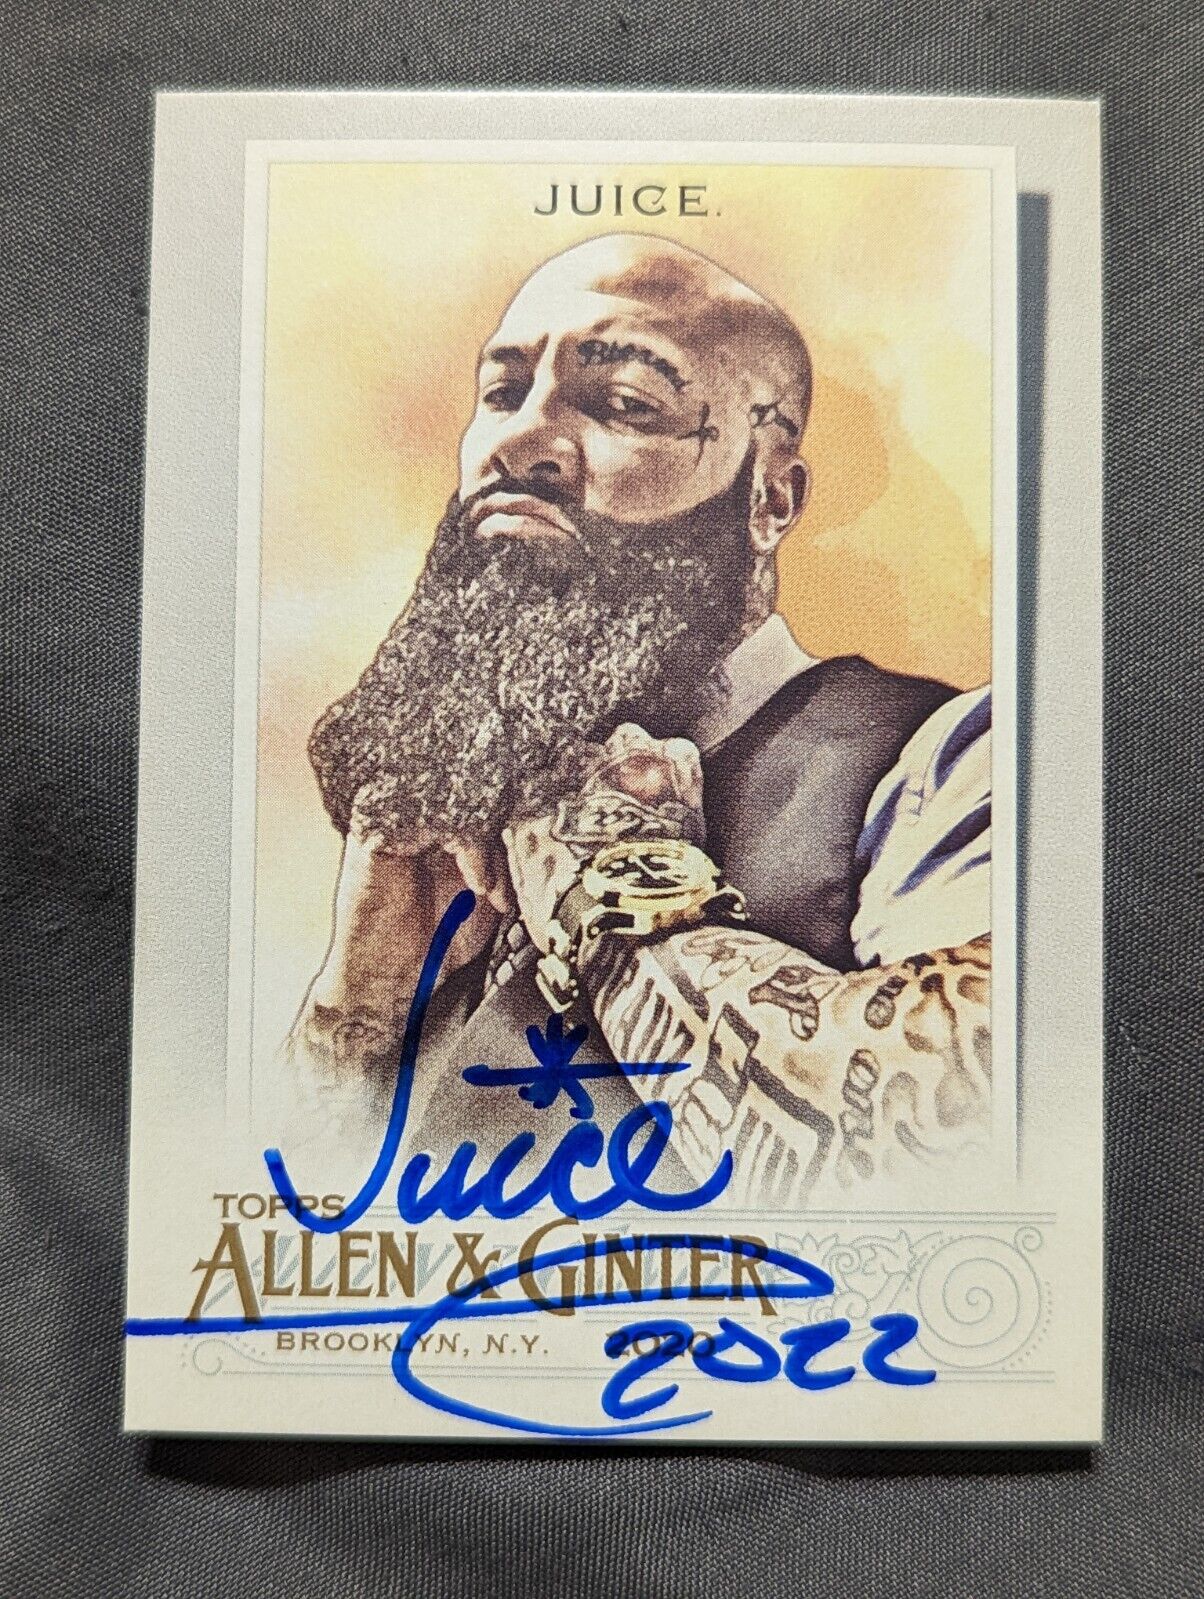 2020 Topps Allen & Ginter Hugo Juice Tandron Autographed Barber Auto MLB Marlins